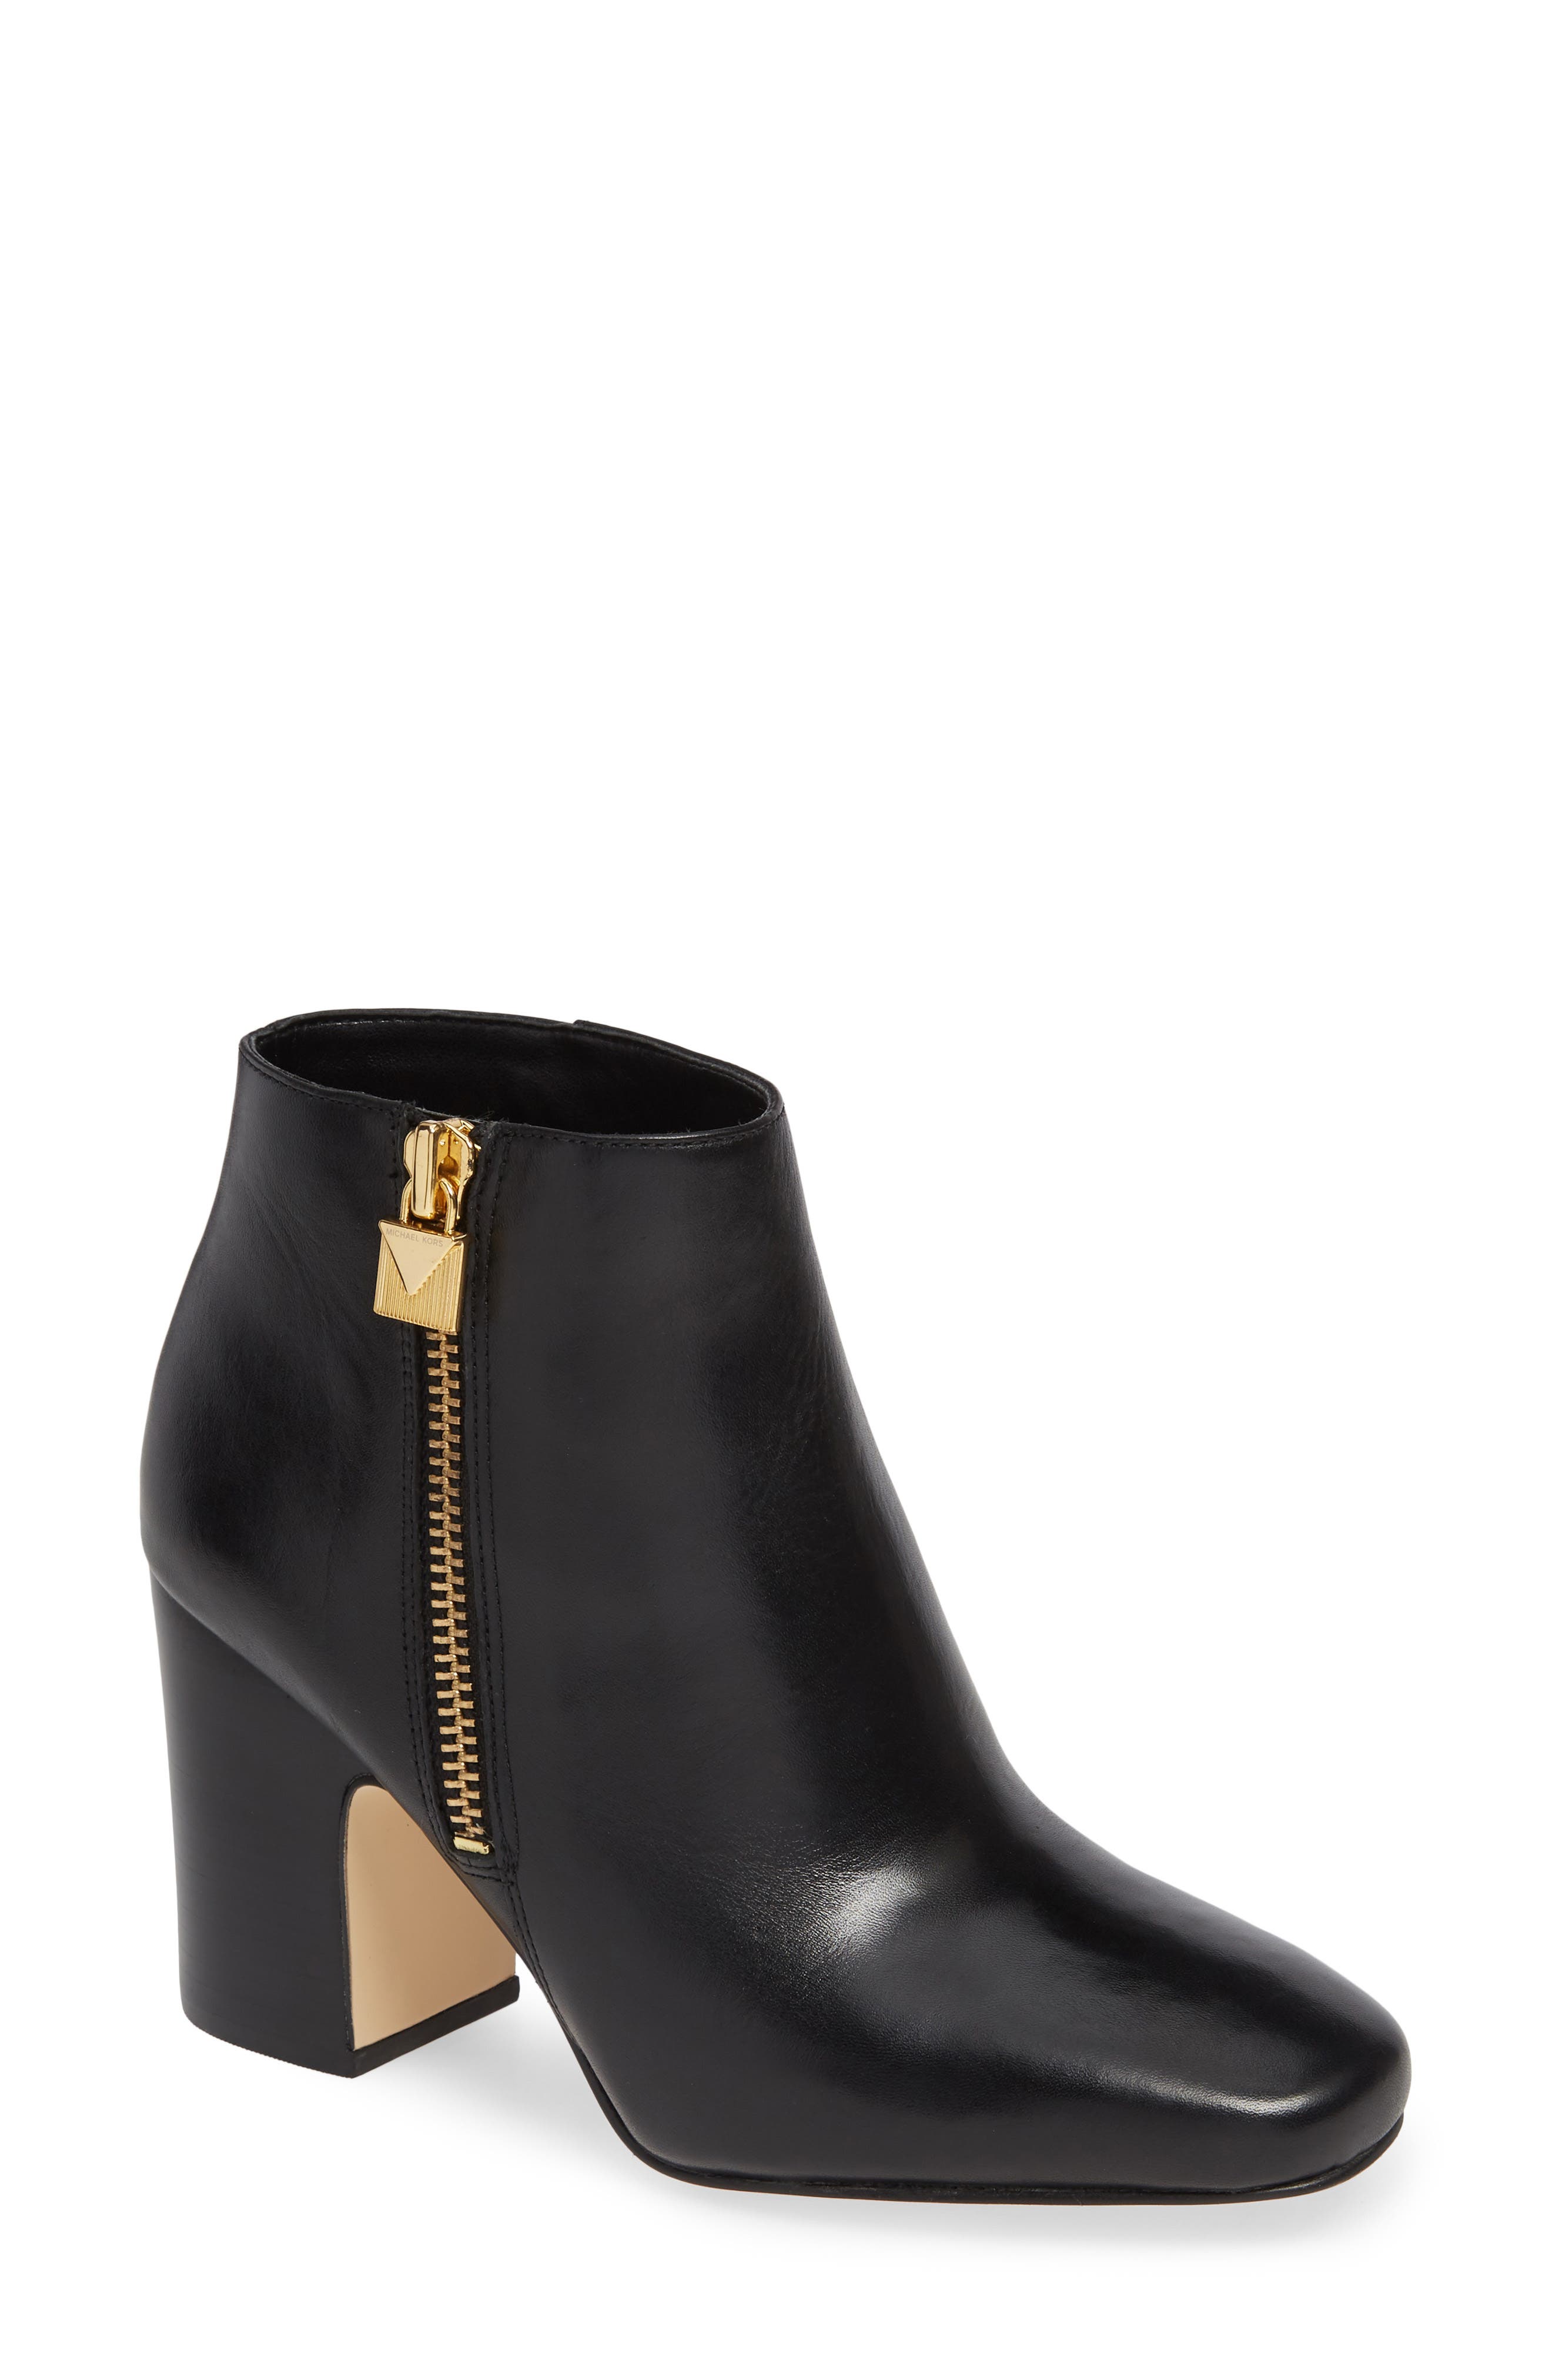 black ankle boots round toe